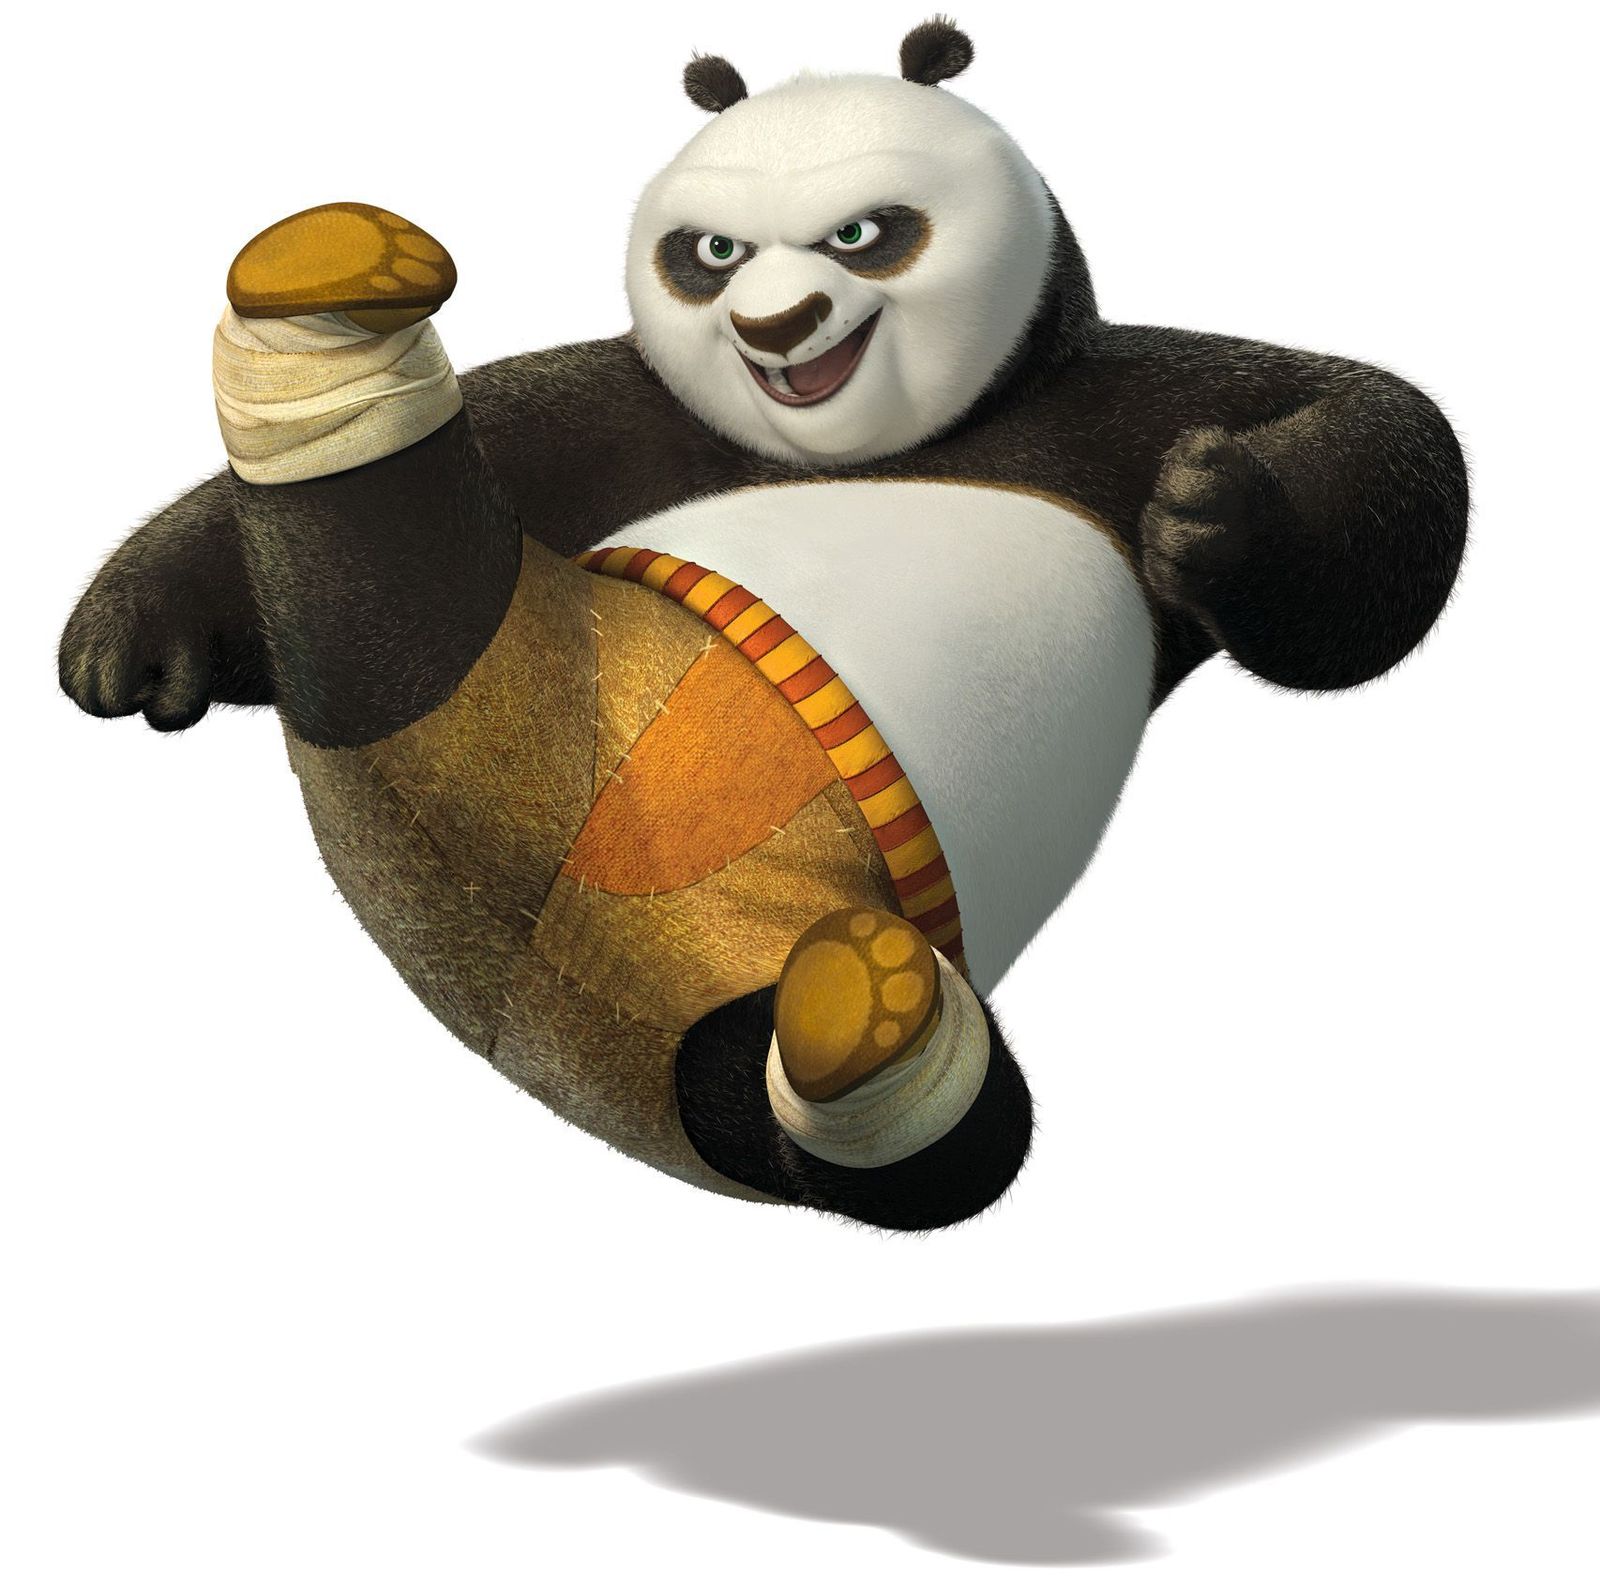 Rejoicing time for fans: Kung Fu Panda 3 release date advanced